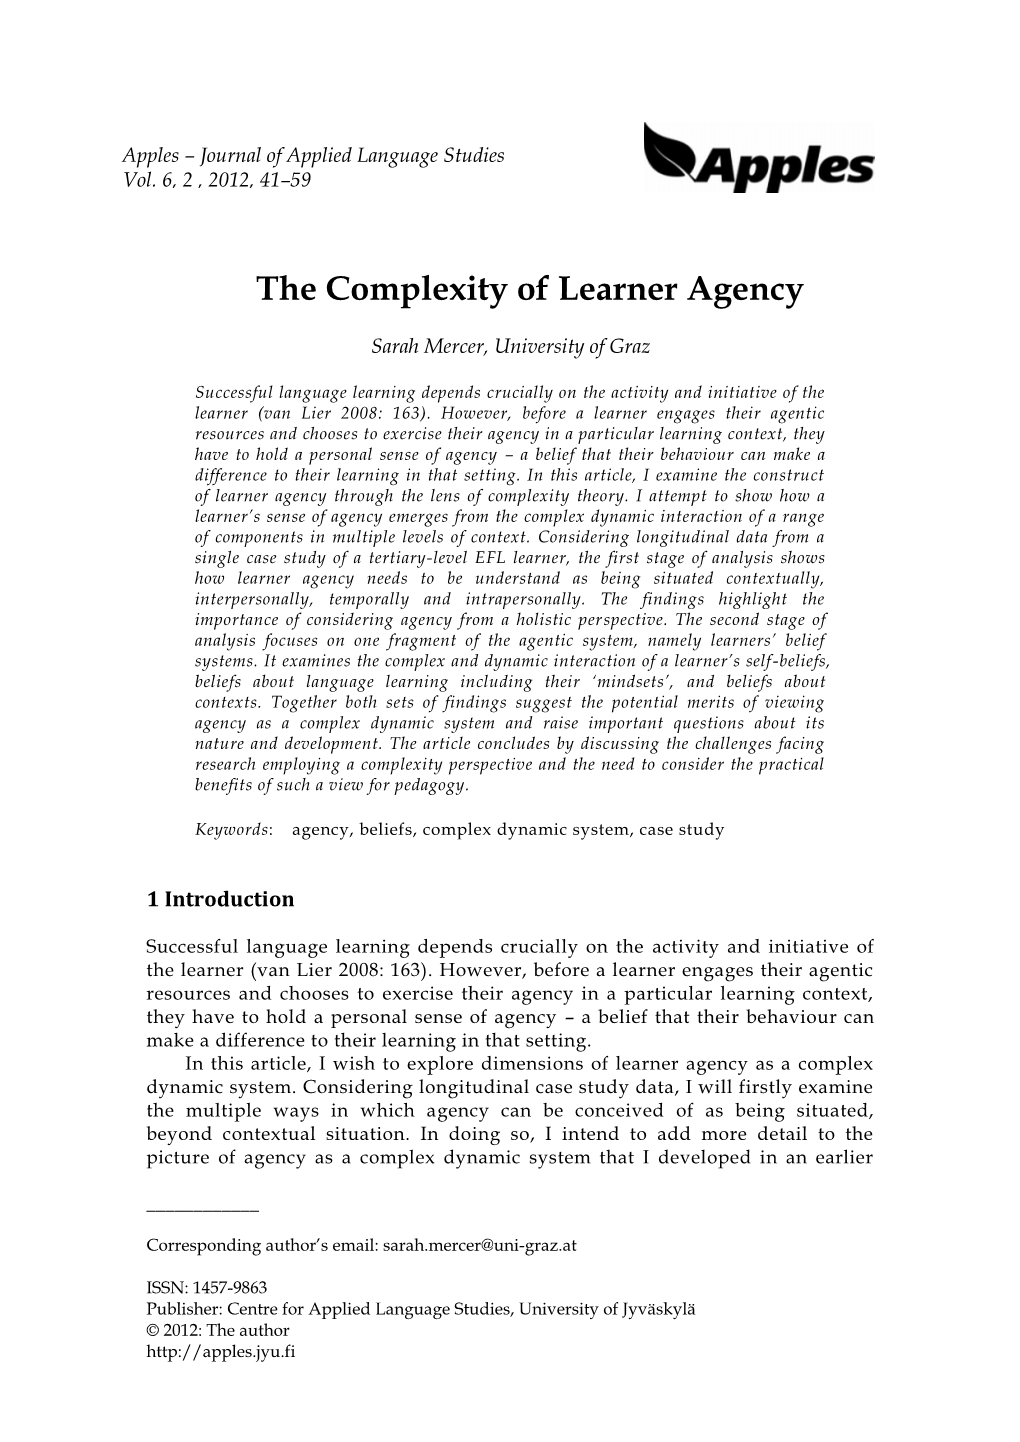 The Complexity of Learner Agency